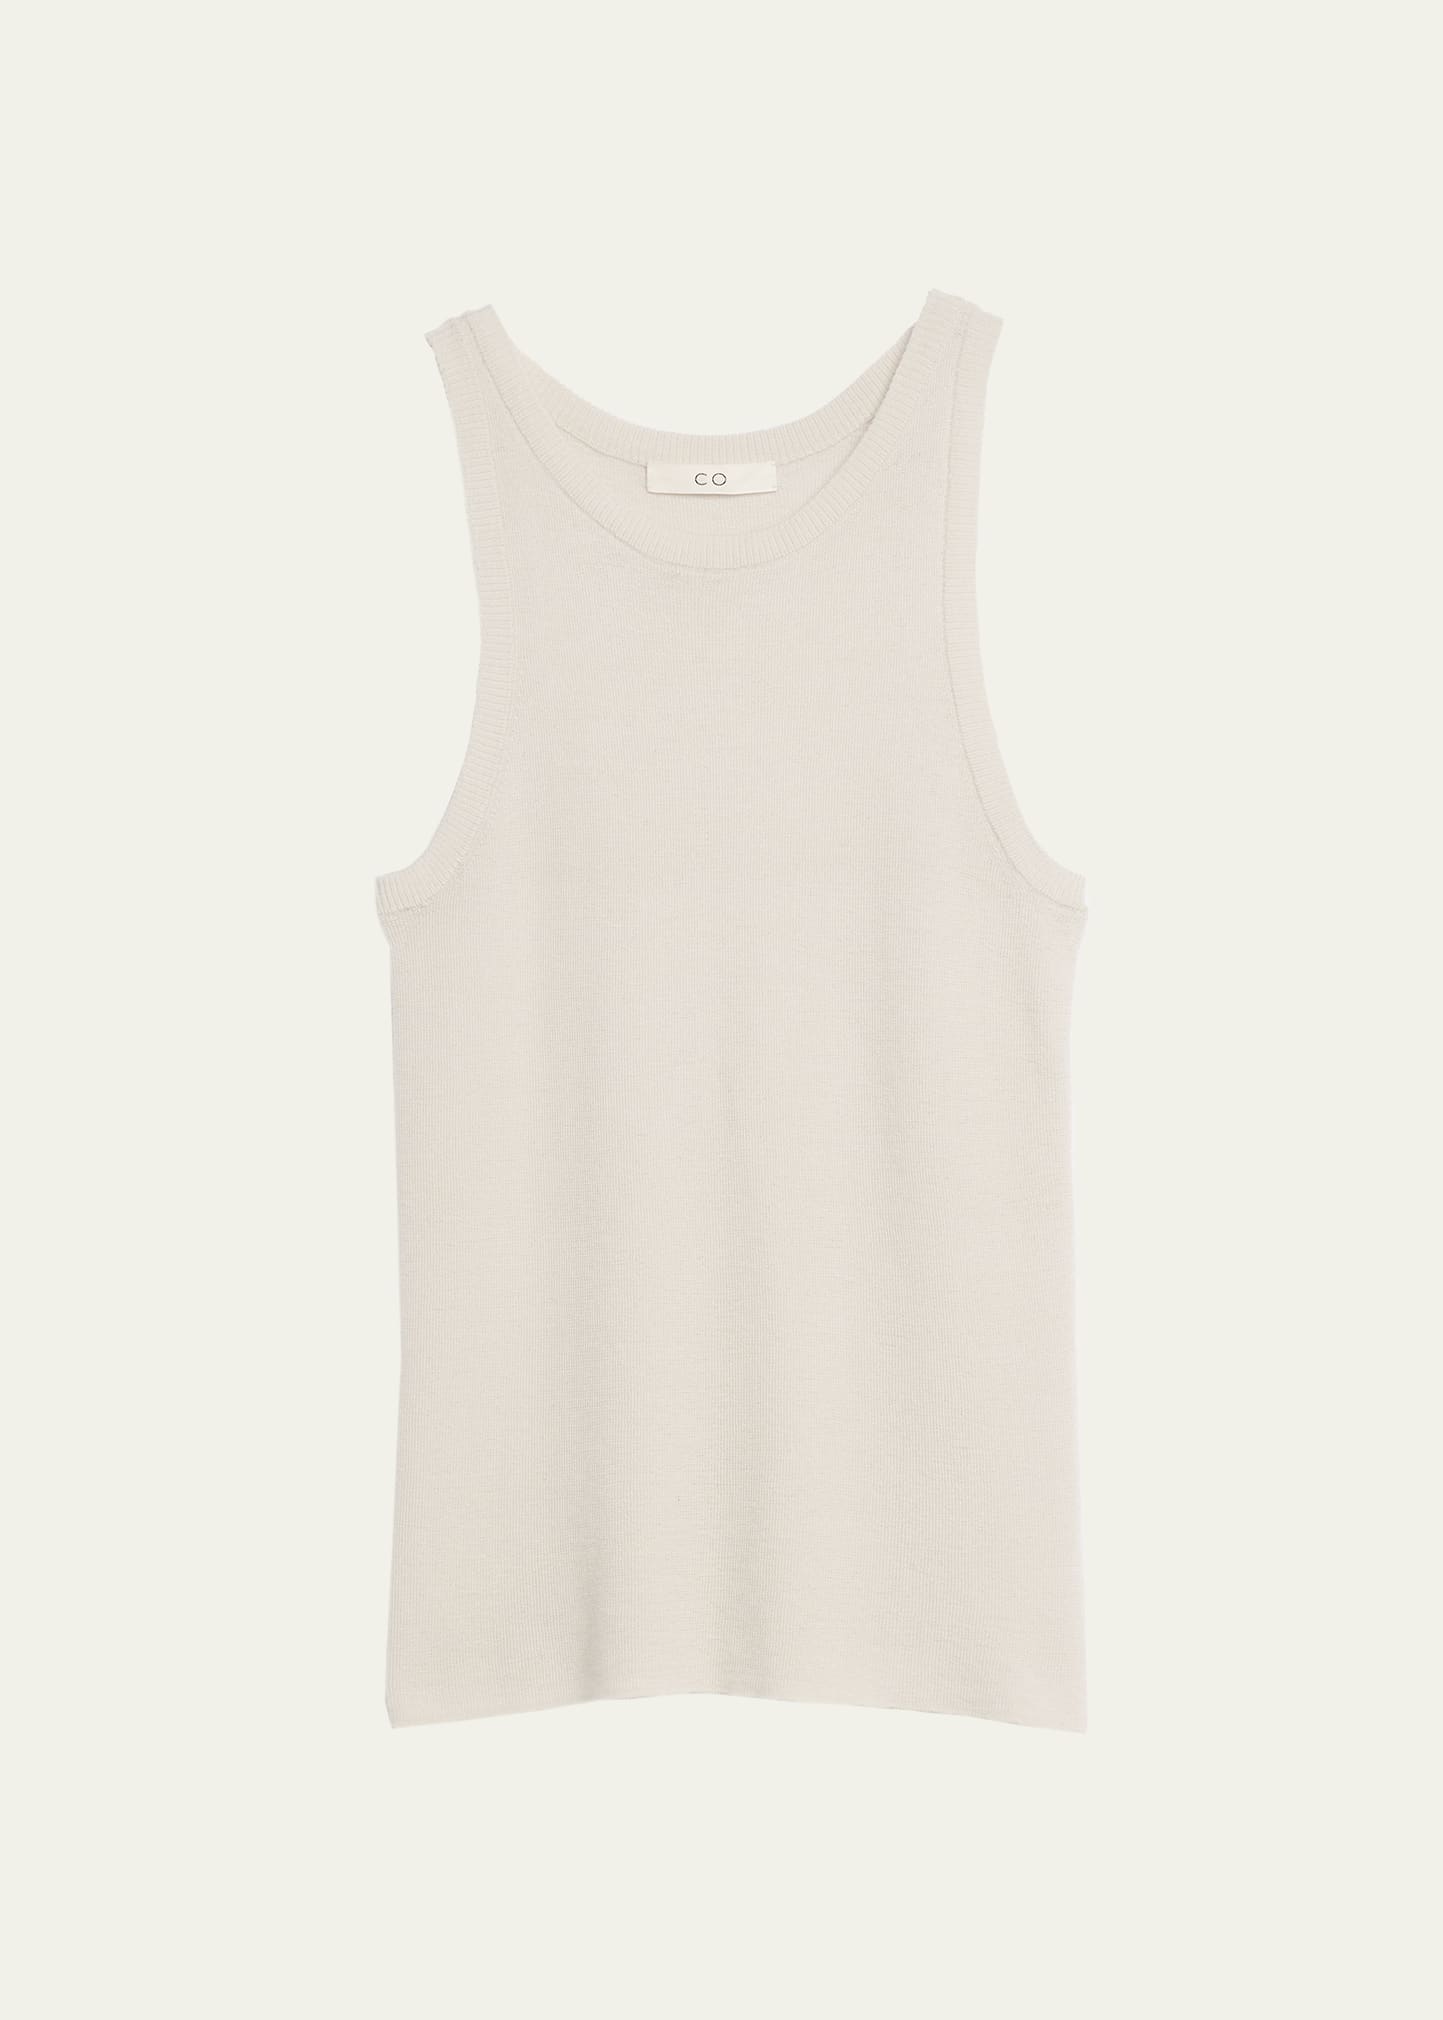 Co Cashmere Tank Top In Light Blue